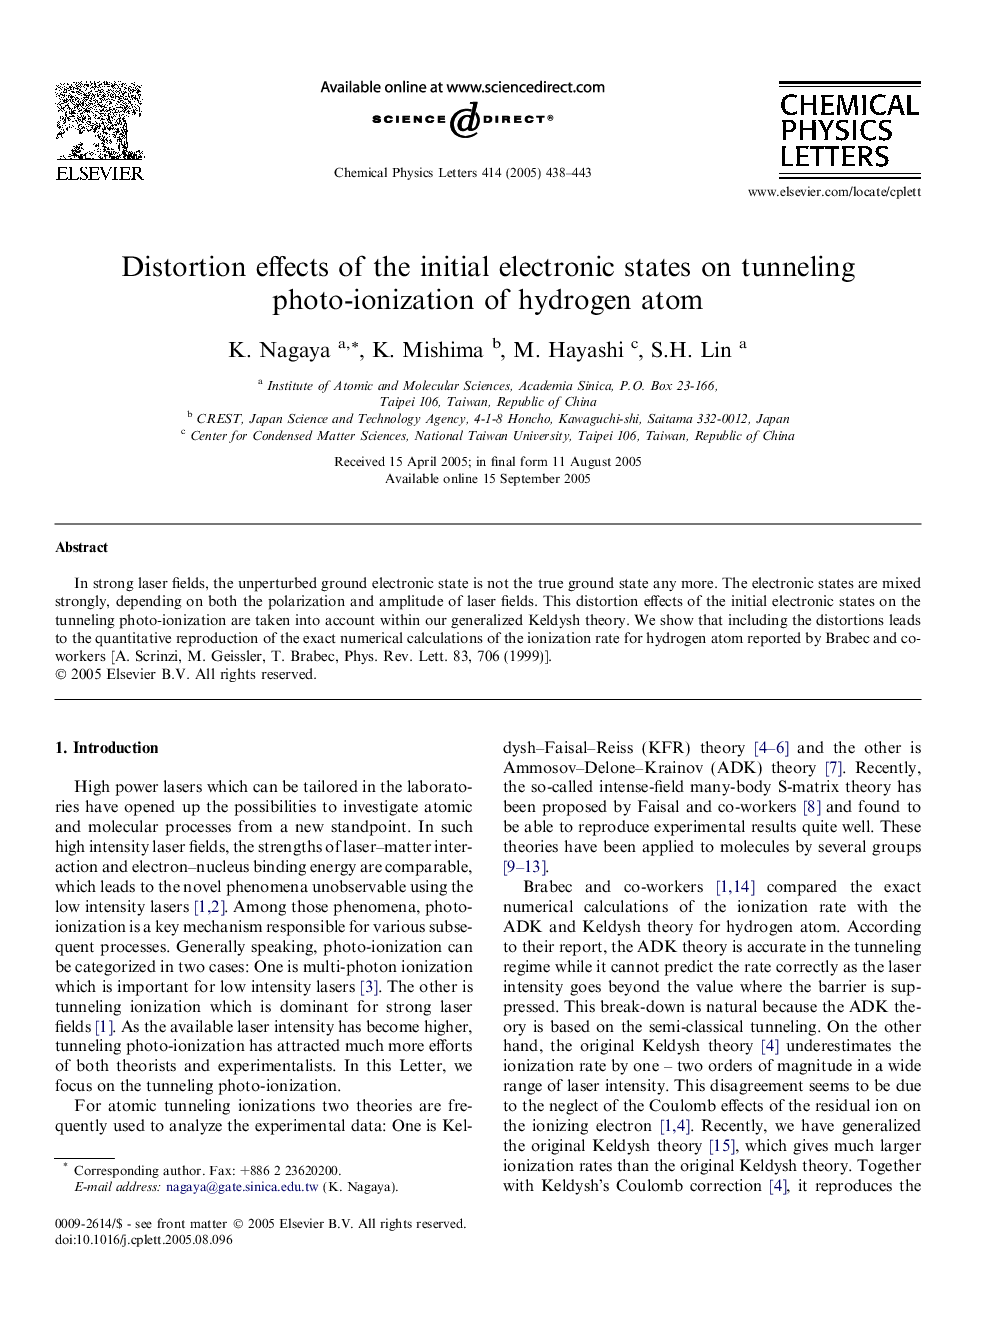 Distortion effects of the initial electronic states on tunneling photo-ionization of hydrogen atom